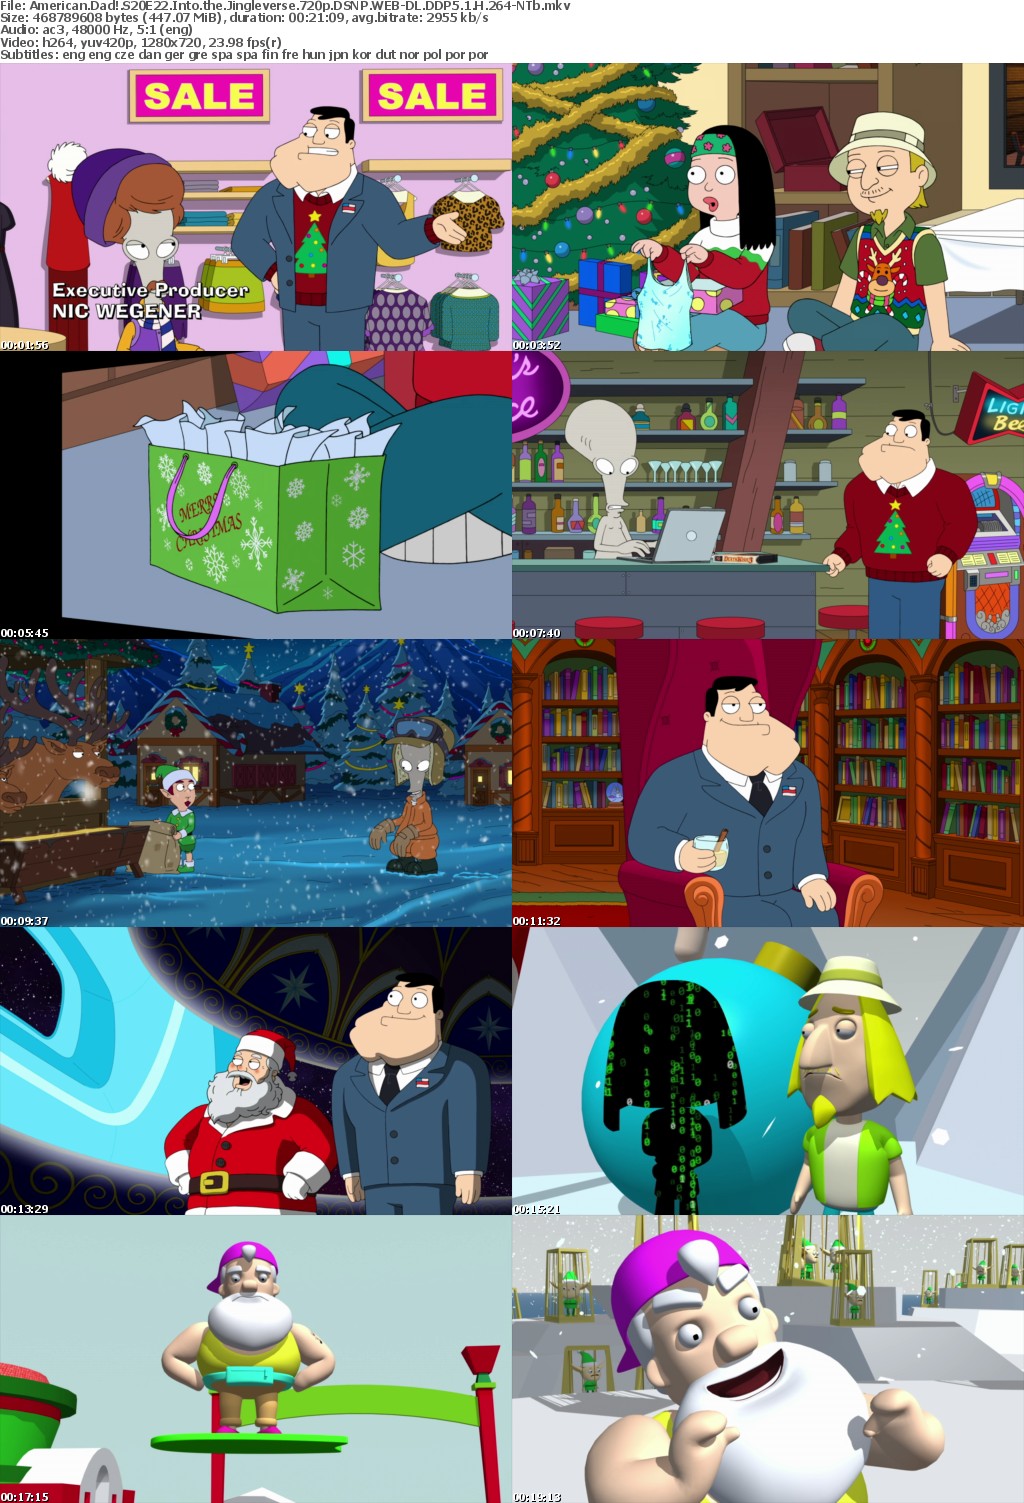 American Dad! S20E22 Into the Jingleverse 720p DSNP WEB-DL DDP5 1 H 264-NTb